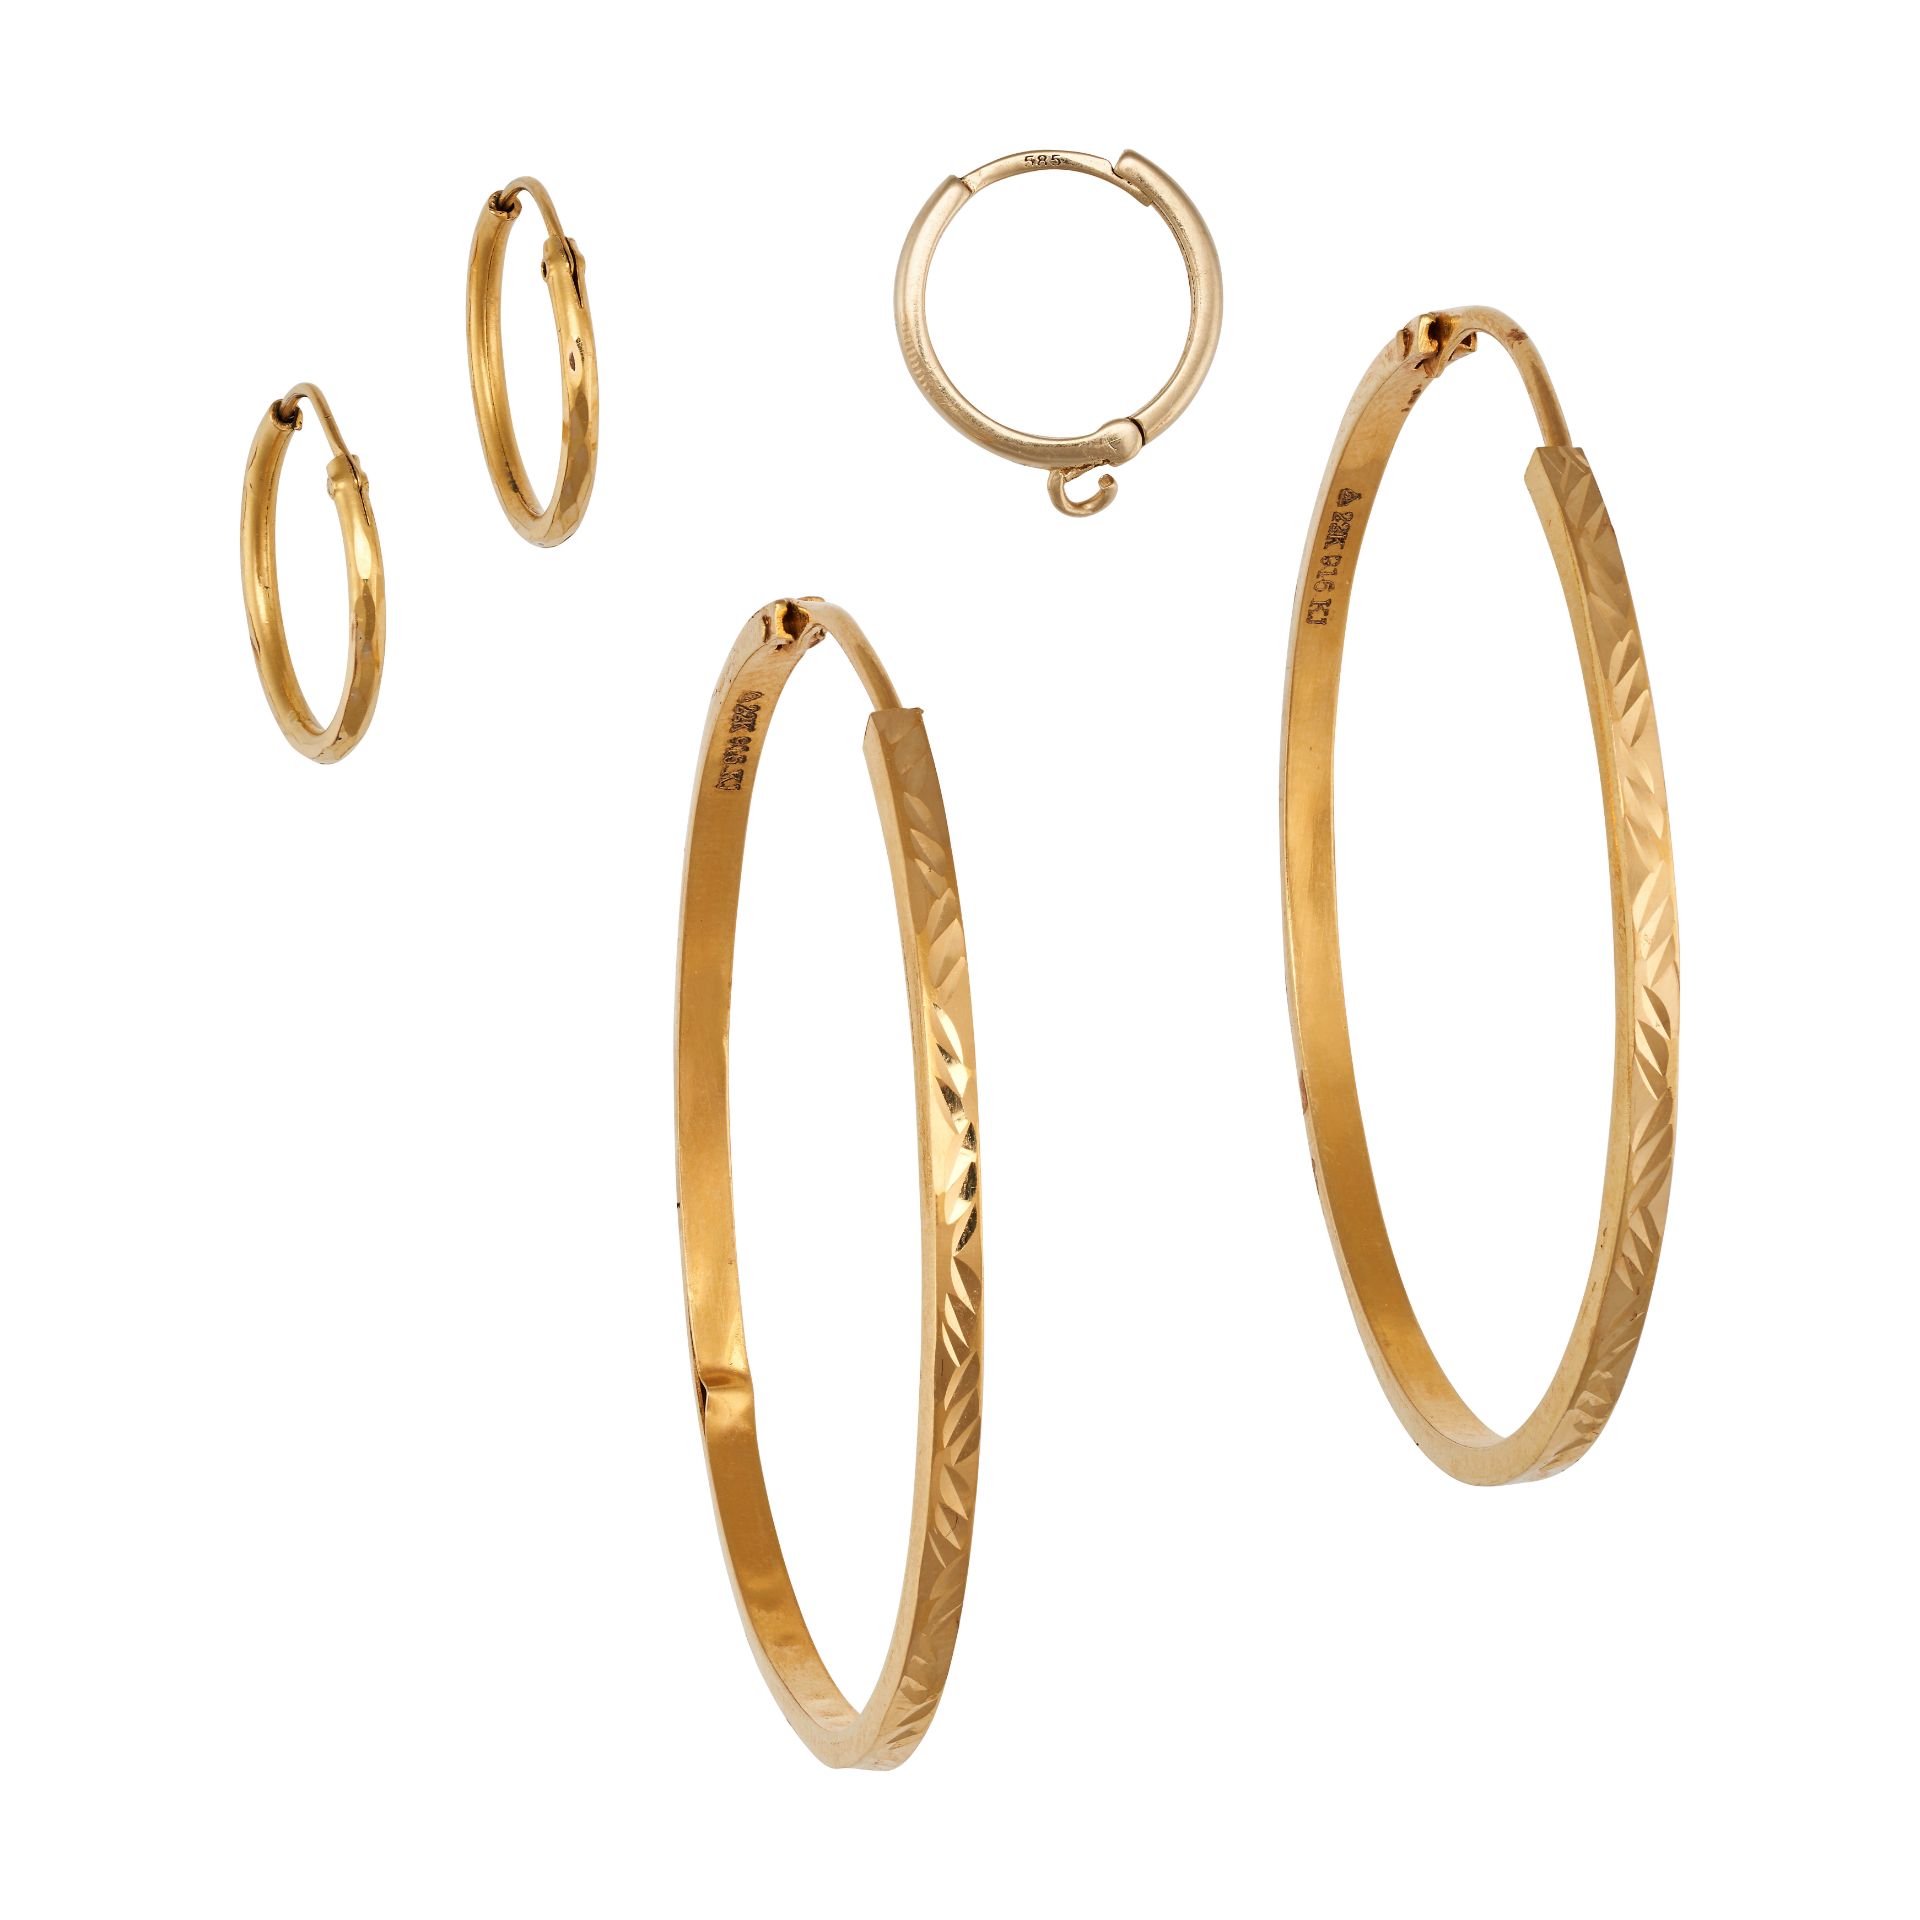 A GROUP LOT OF GOLD HOOP EARRINGS in yellow gold, comprising two pairs of earrings and one singul...